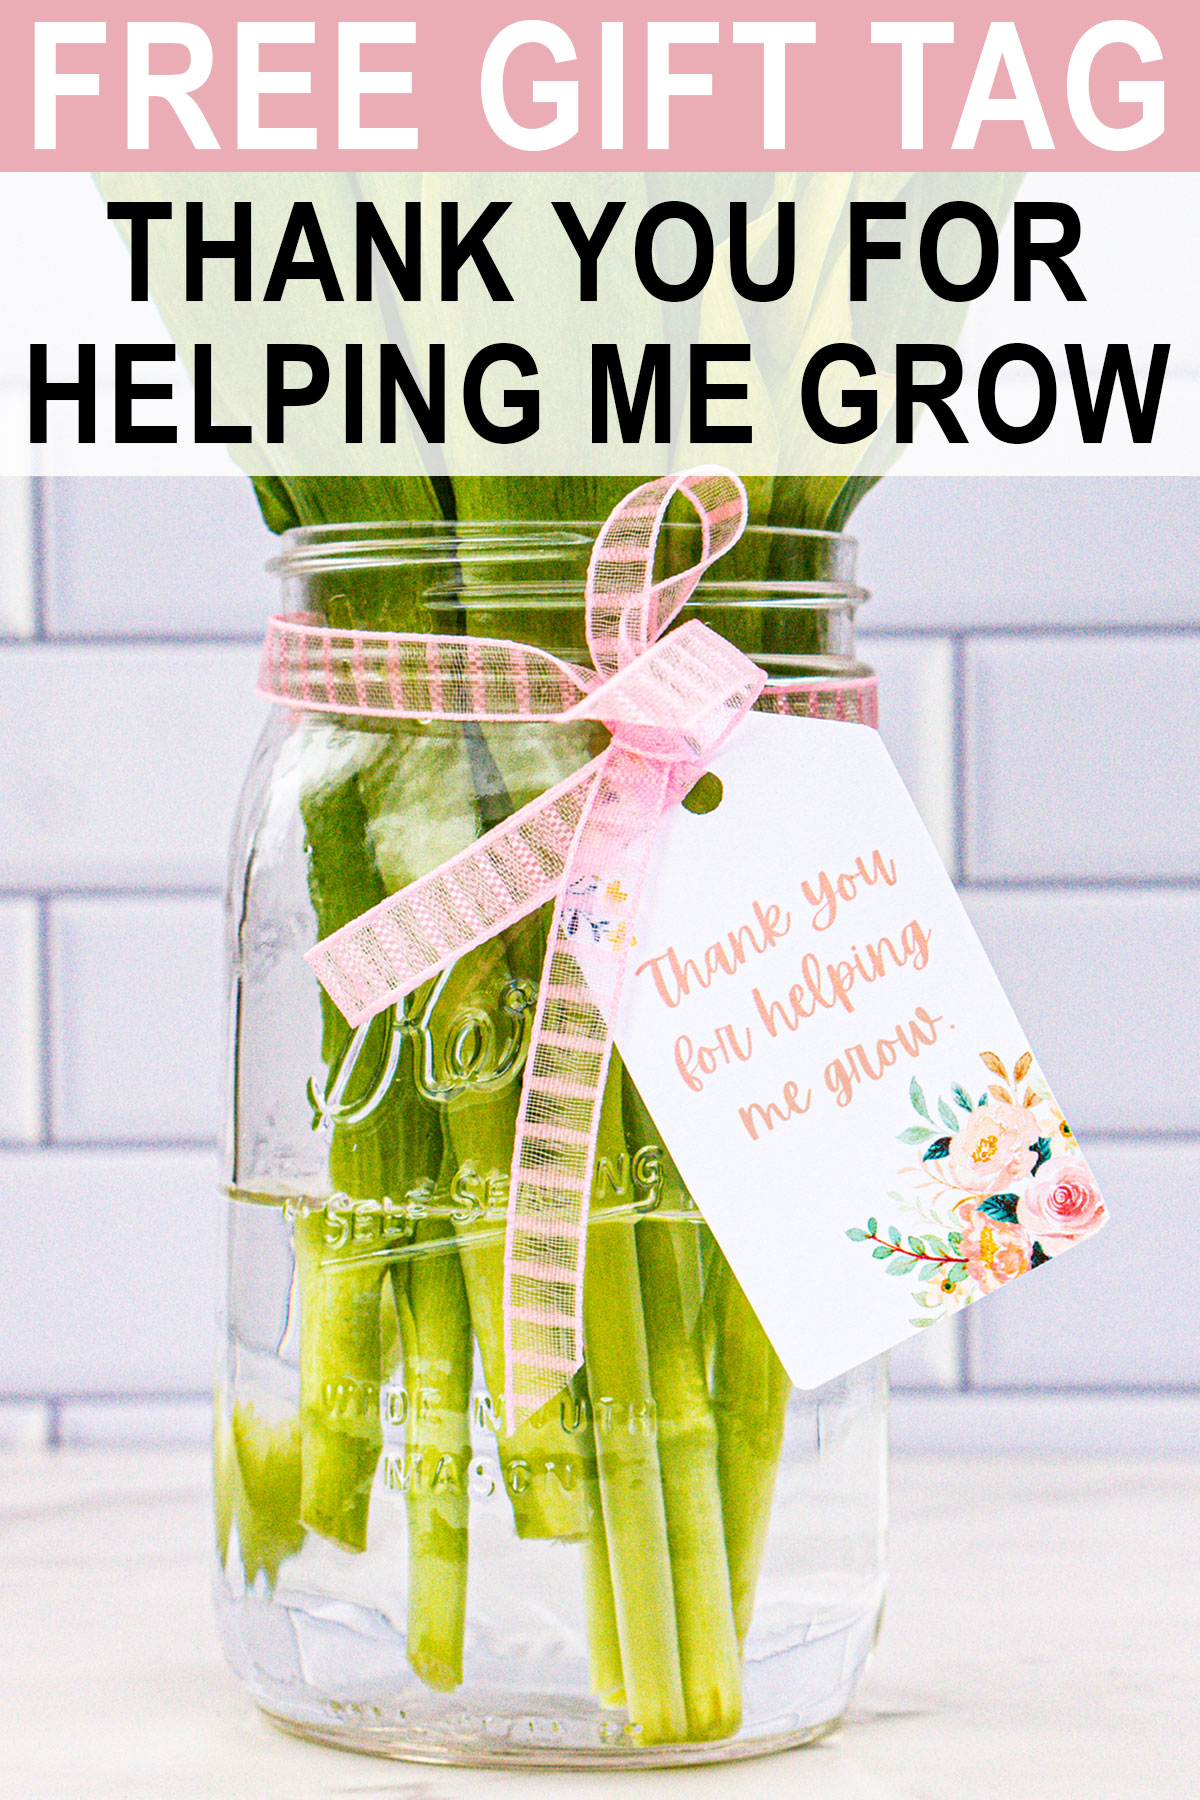 At the top, it says free gift tag. Thank you for helping me grow. Below that is an image of a mason jar of flowers (purple tulips) with a gift tag that says, "Thanks for helping me grow."